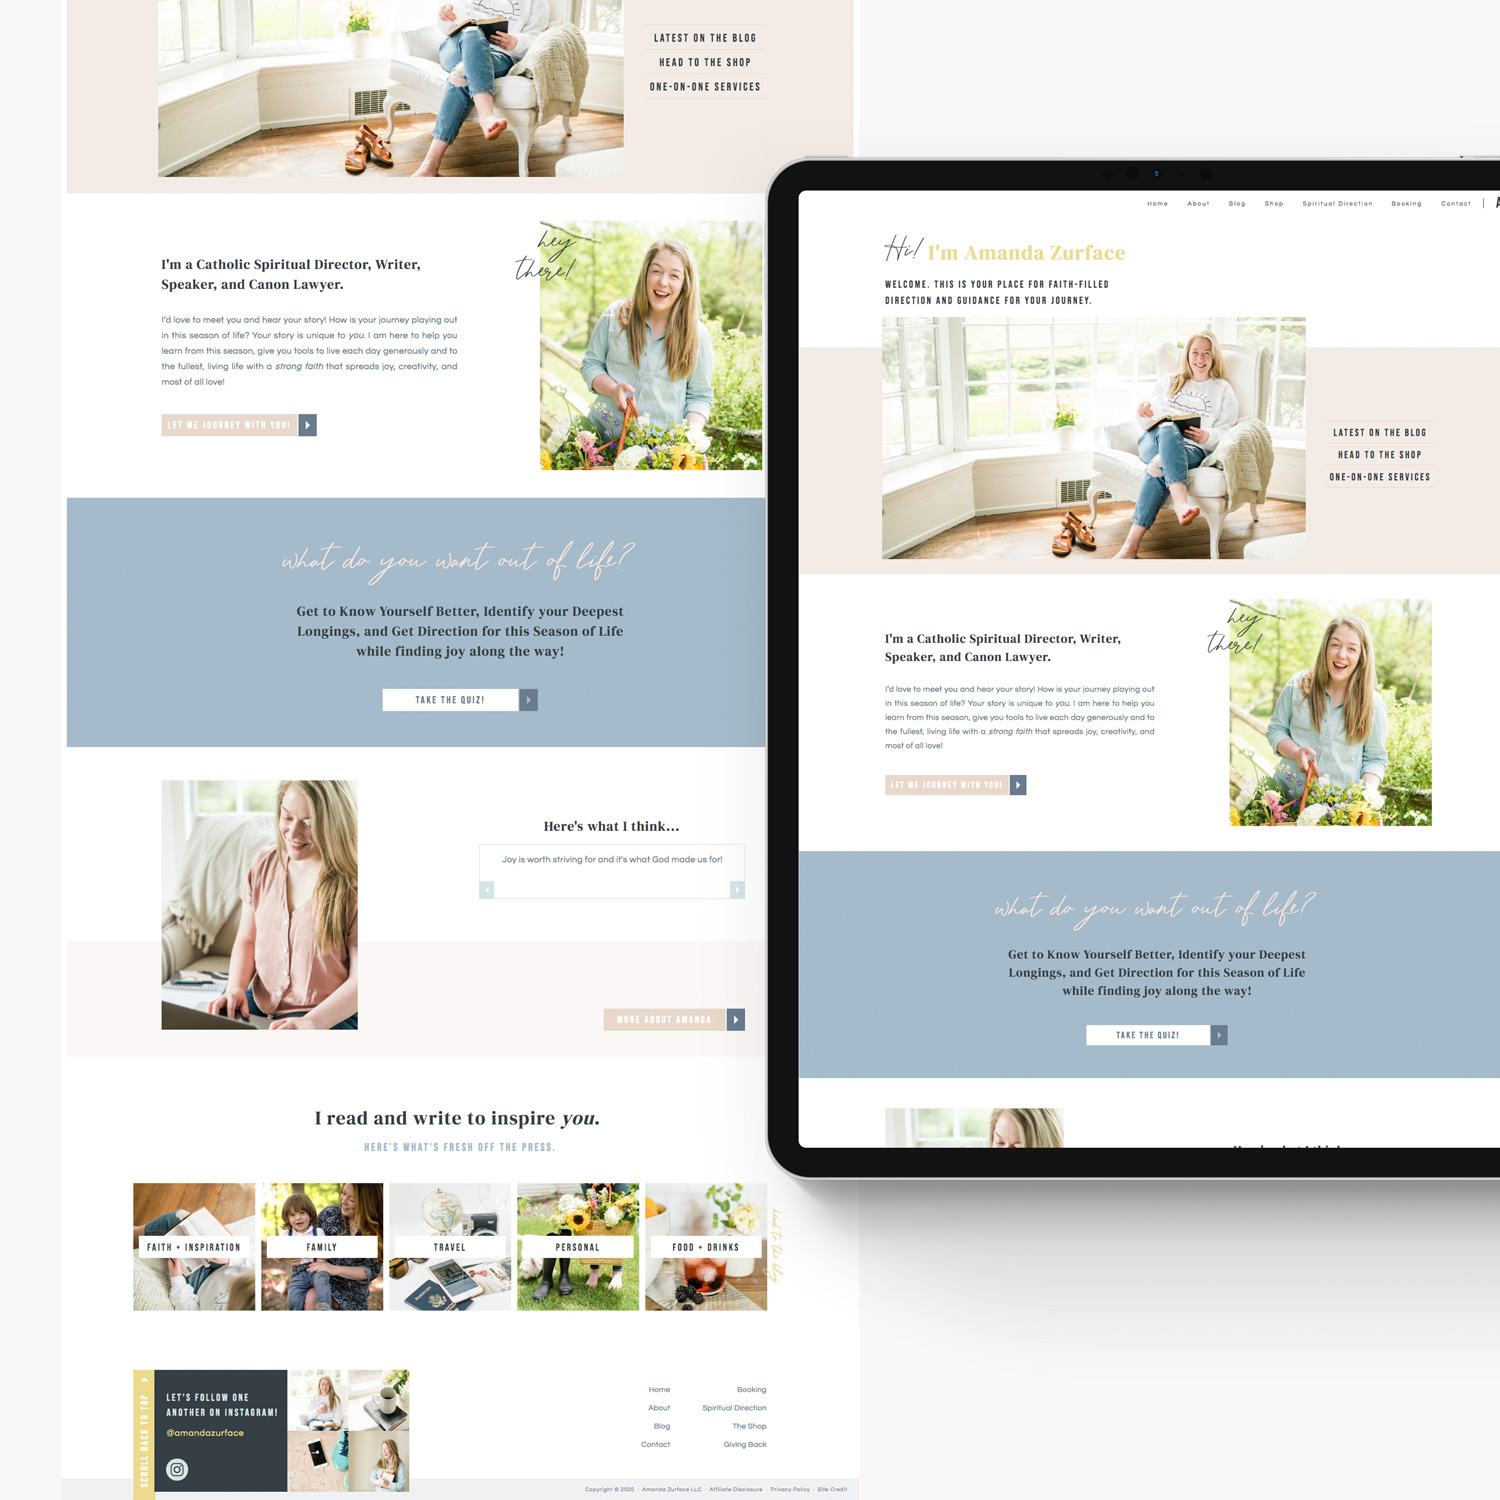 Showit website home page design for Amanda Zurface, Christian lifestyle brand and blog, by MK Design Studio